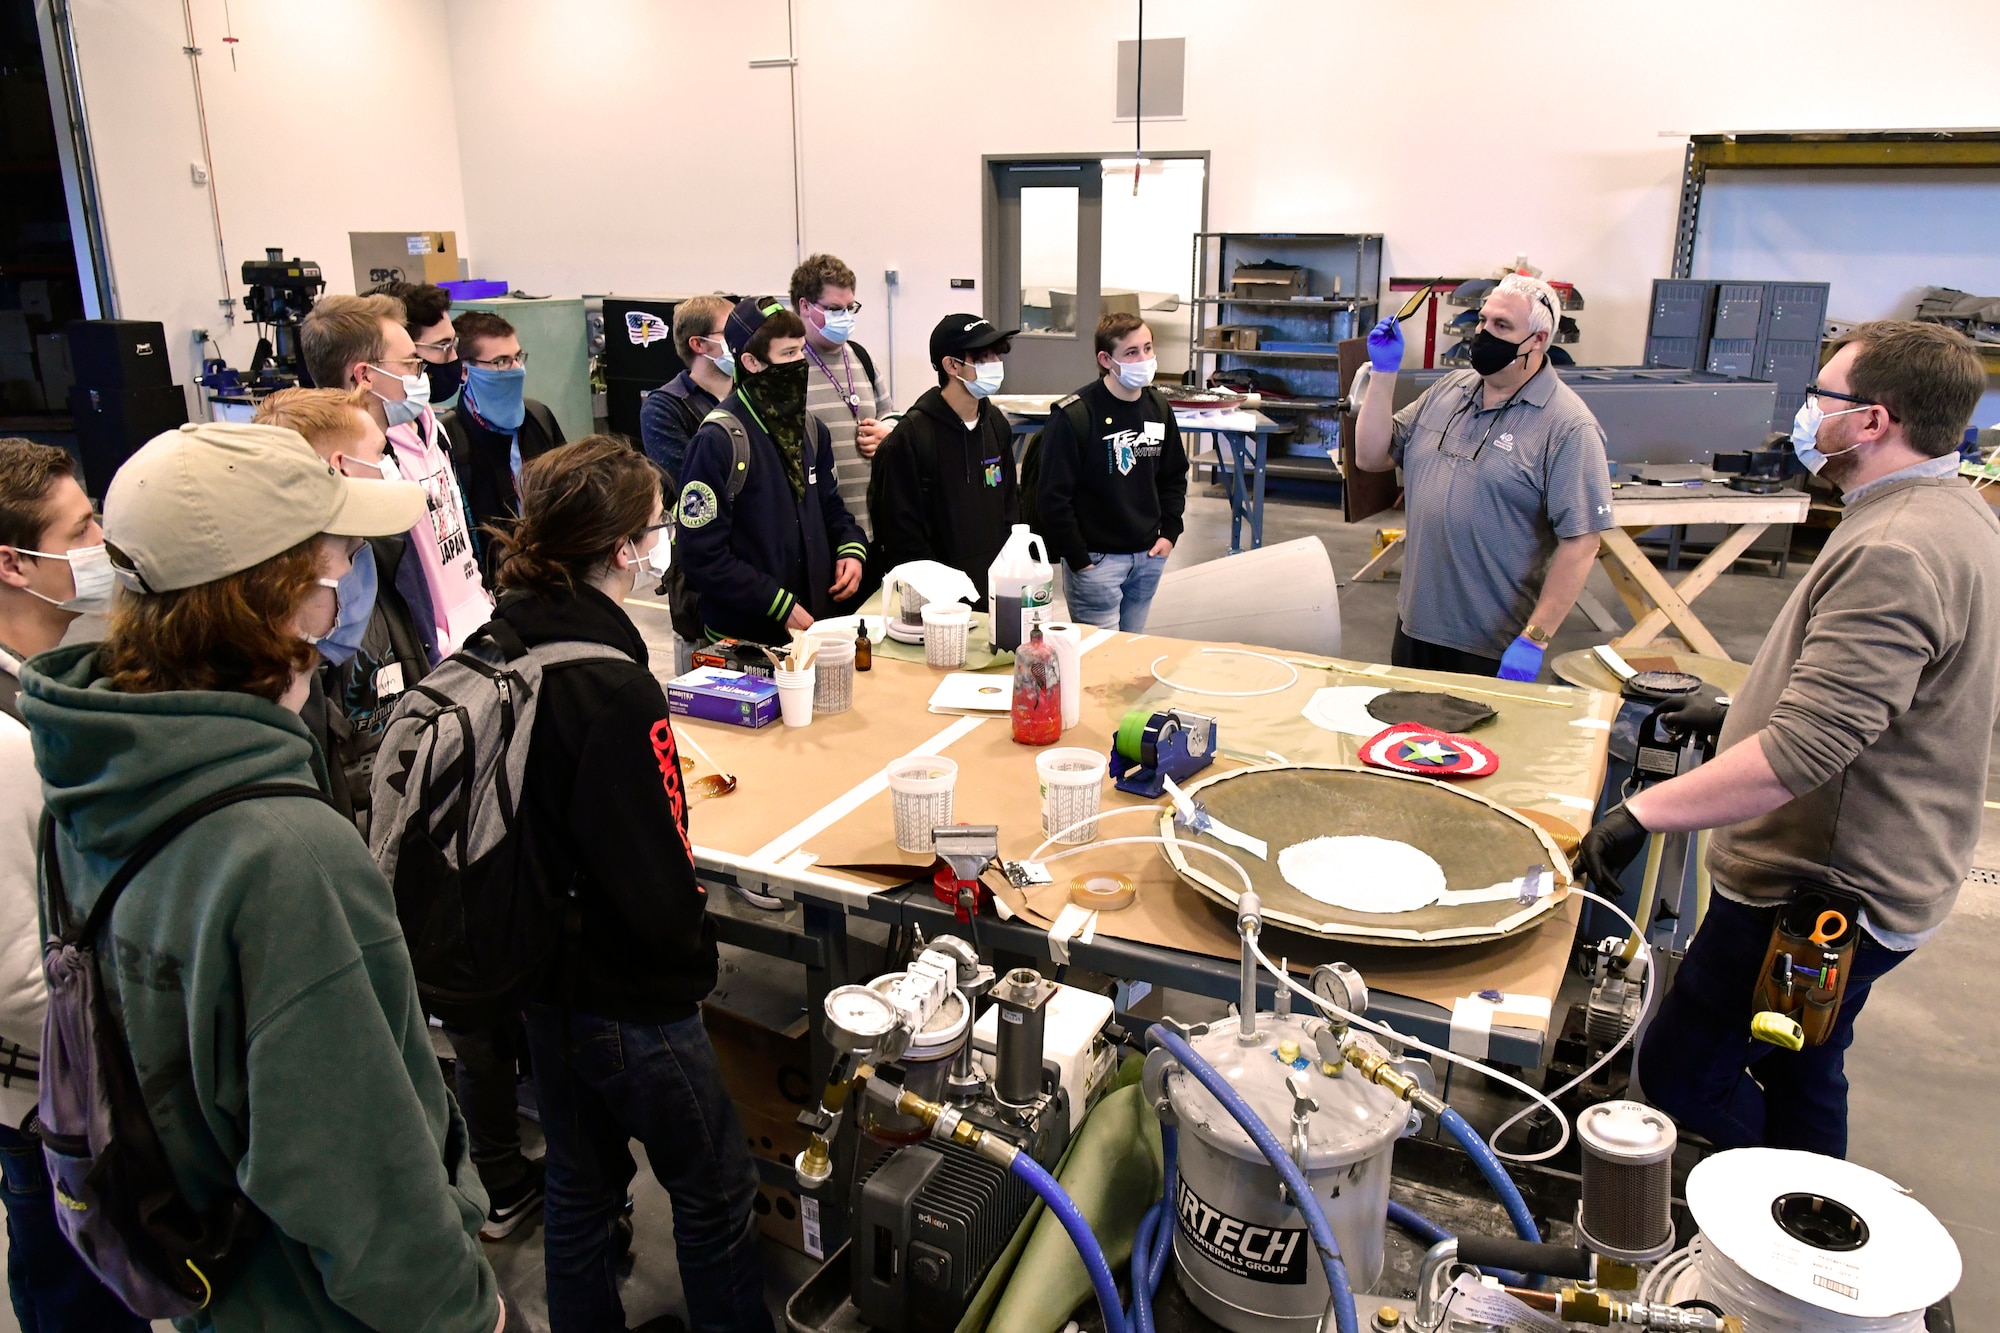 High school students stand around a table littered with tools and other materials inside the museum's aircraft renovation center.